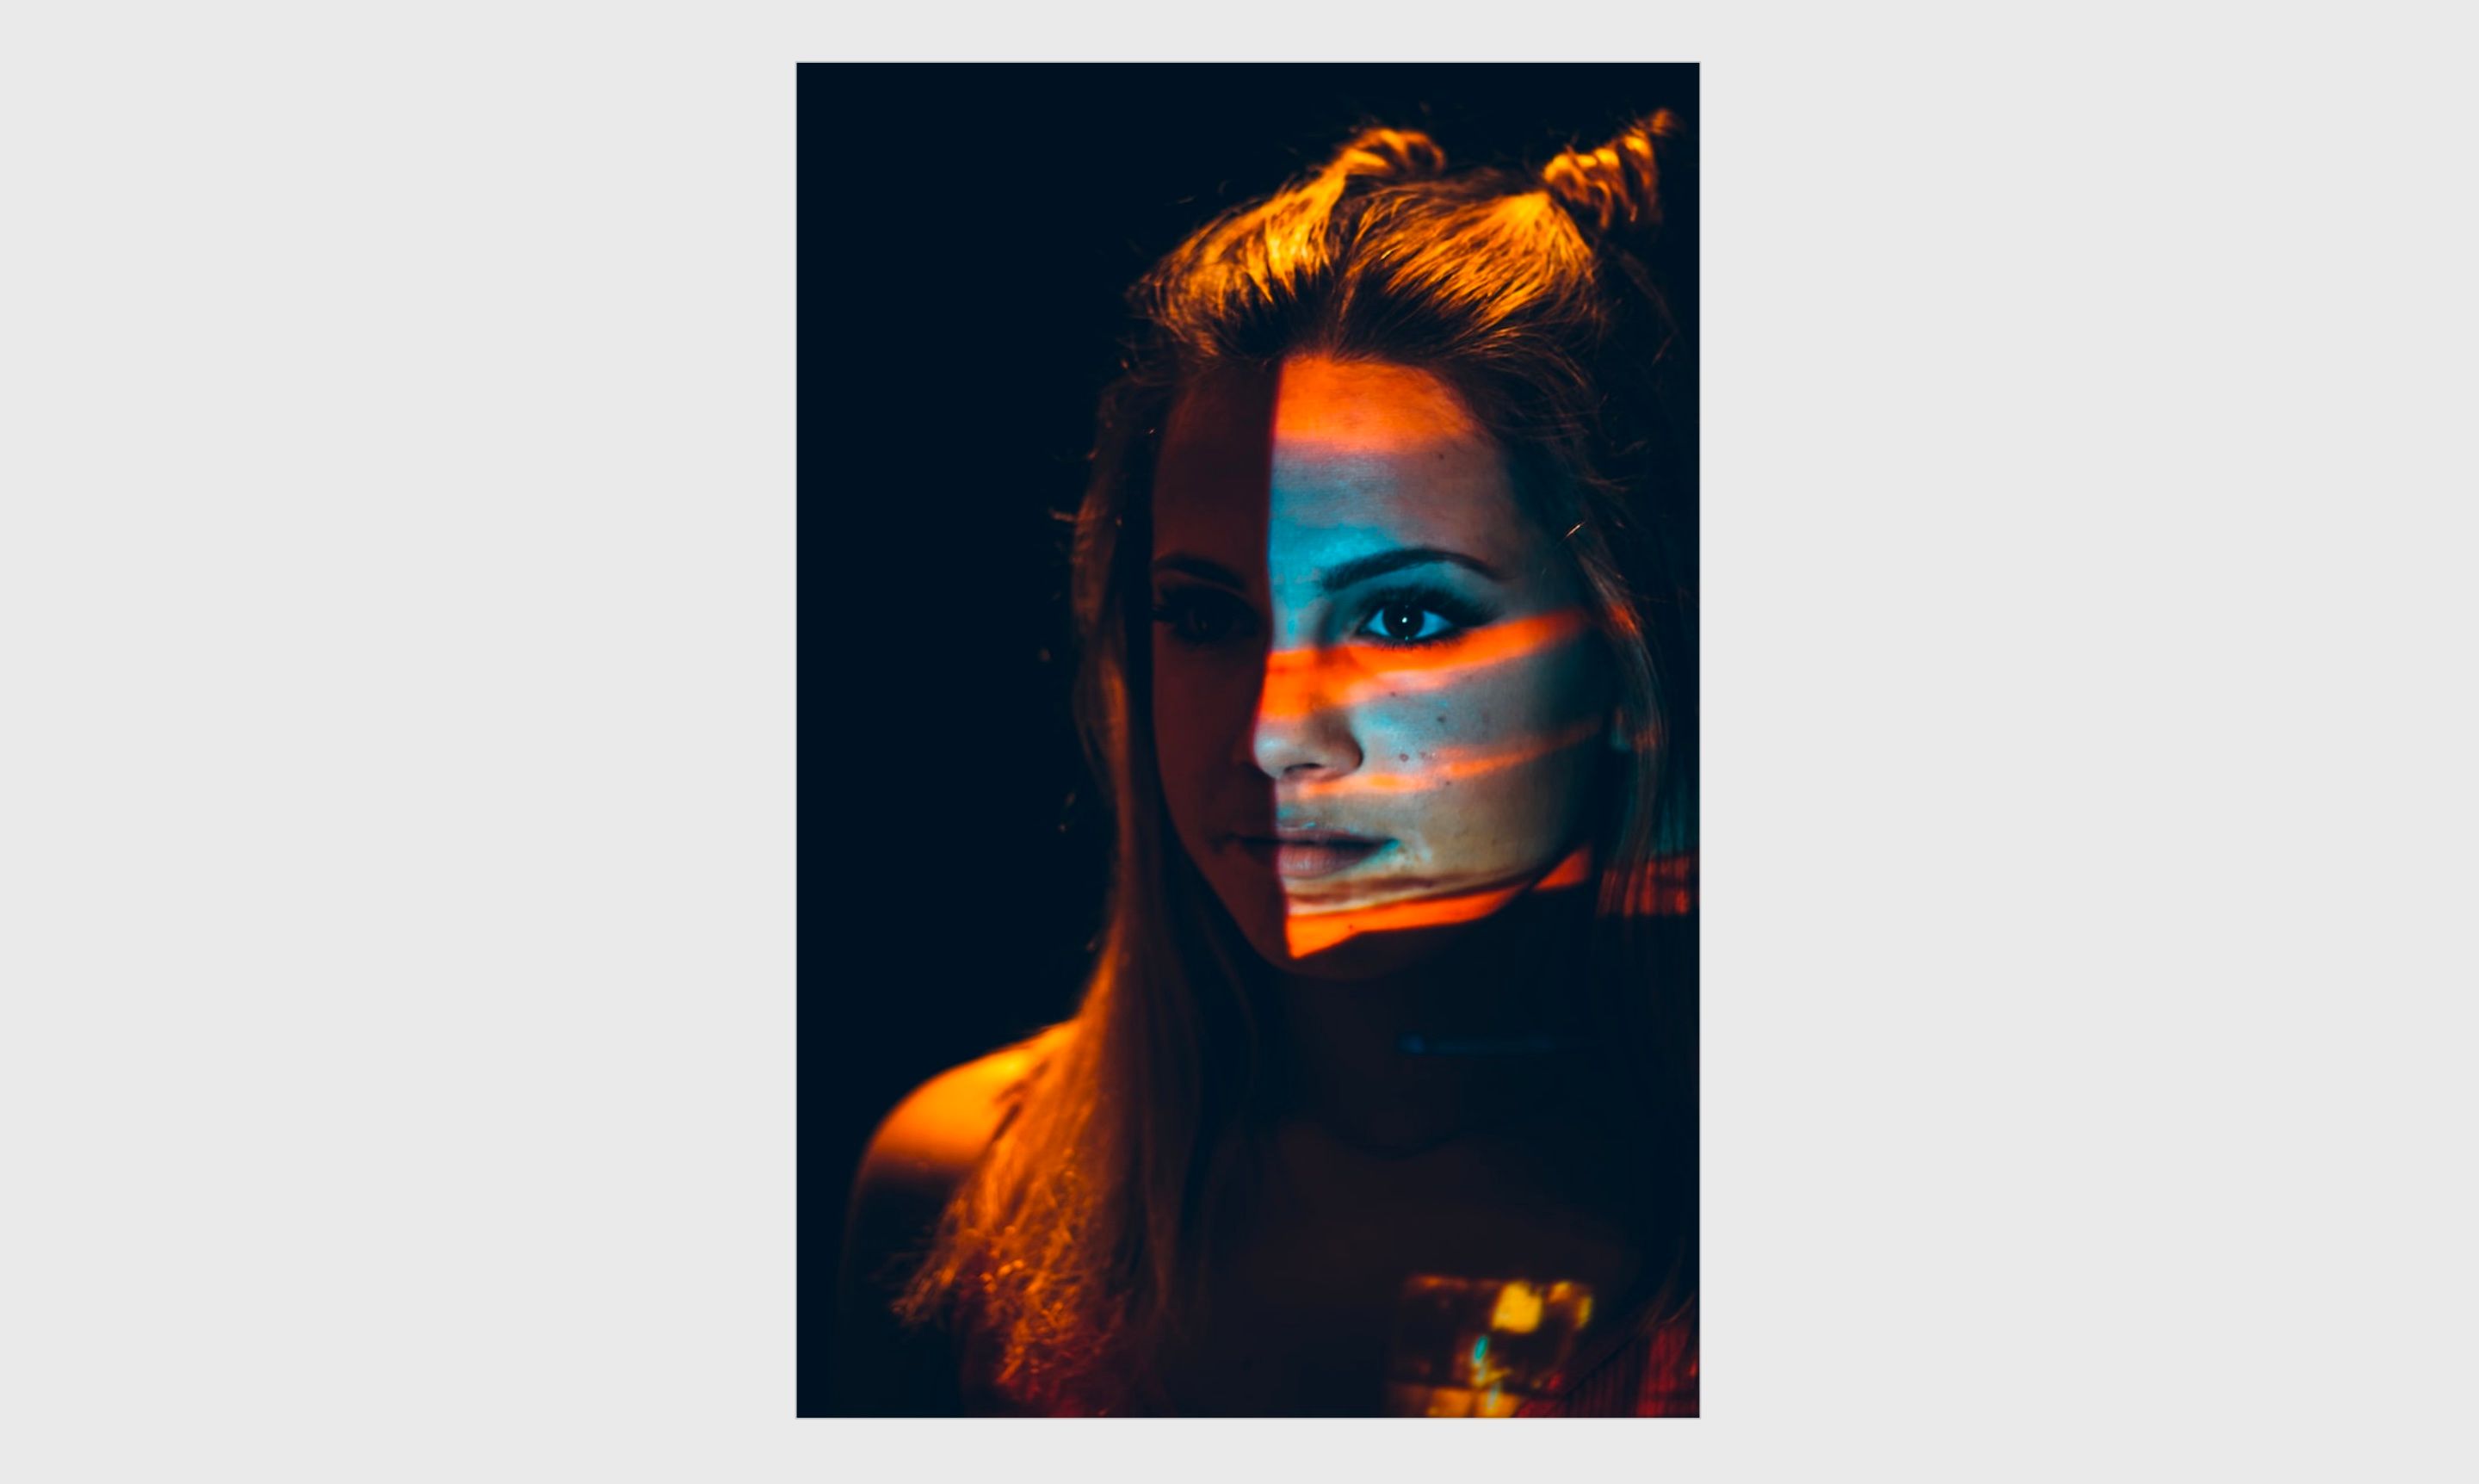 Self portrait of a woman with colored lights on her face